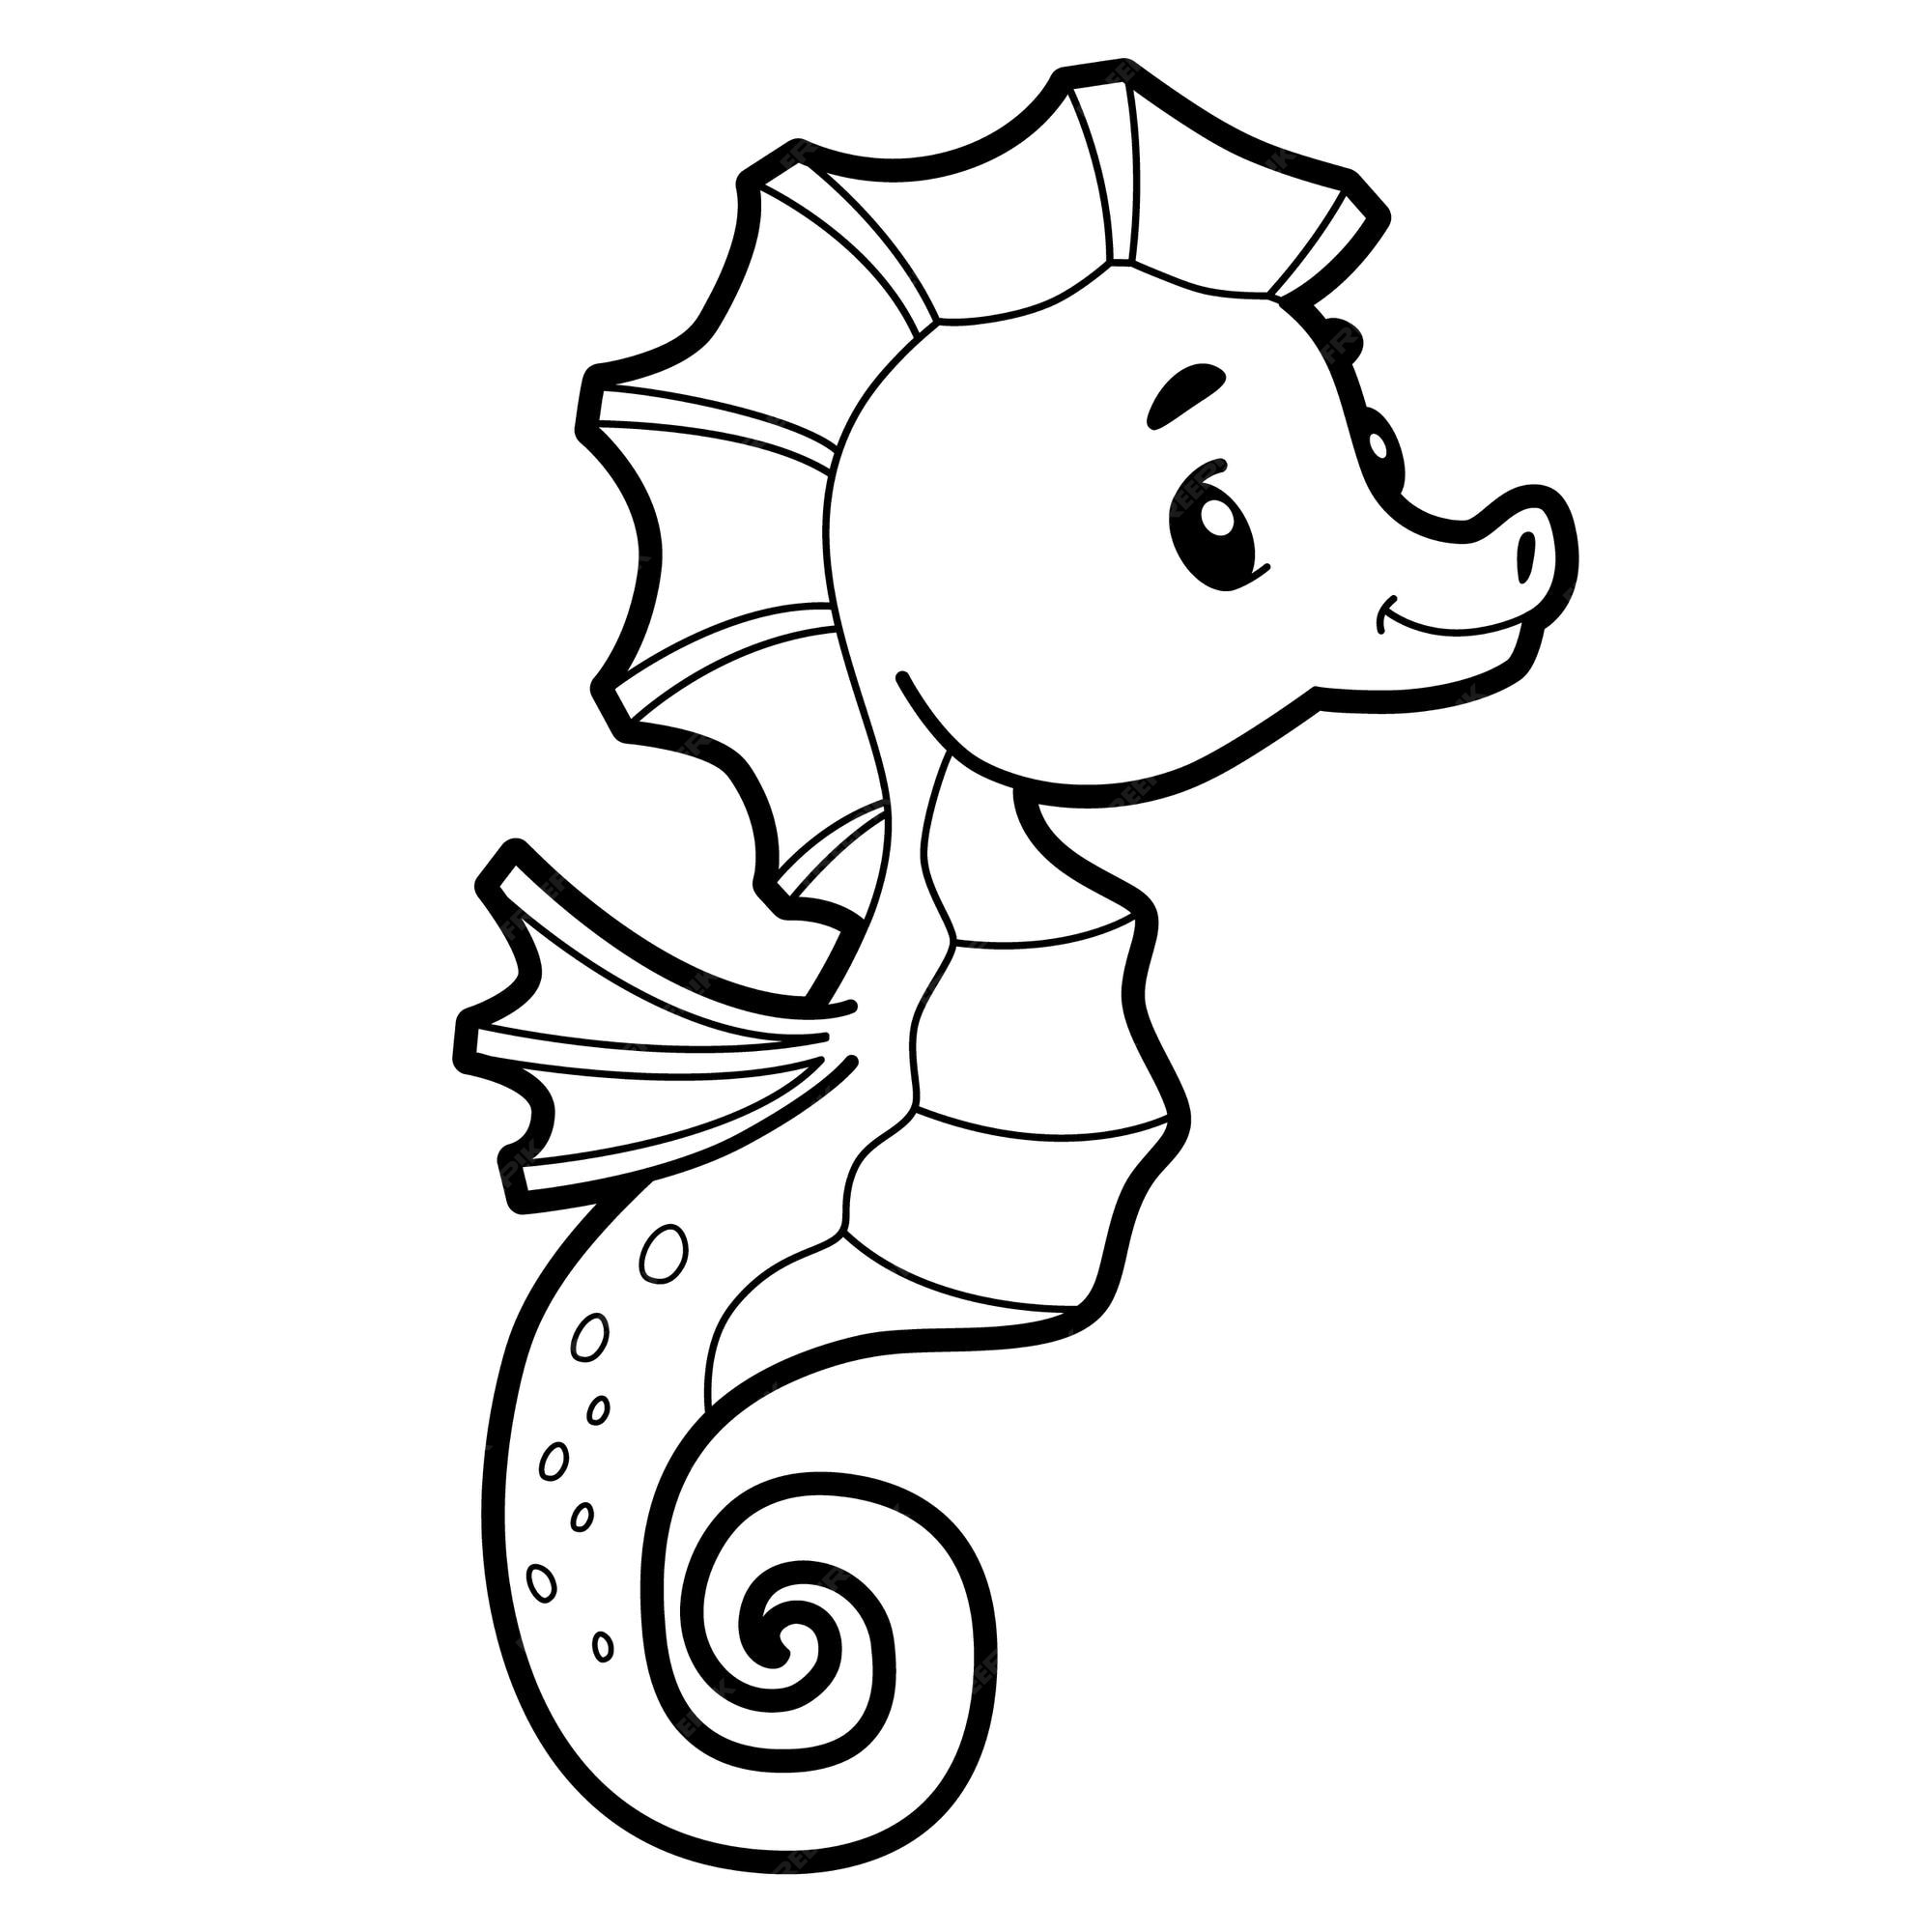 Premium vector coloring book or page for kids black and white sea horse